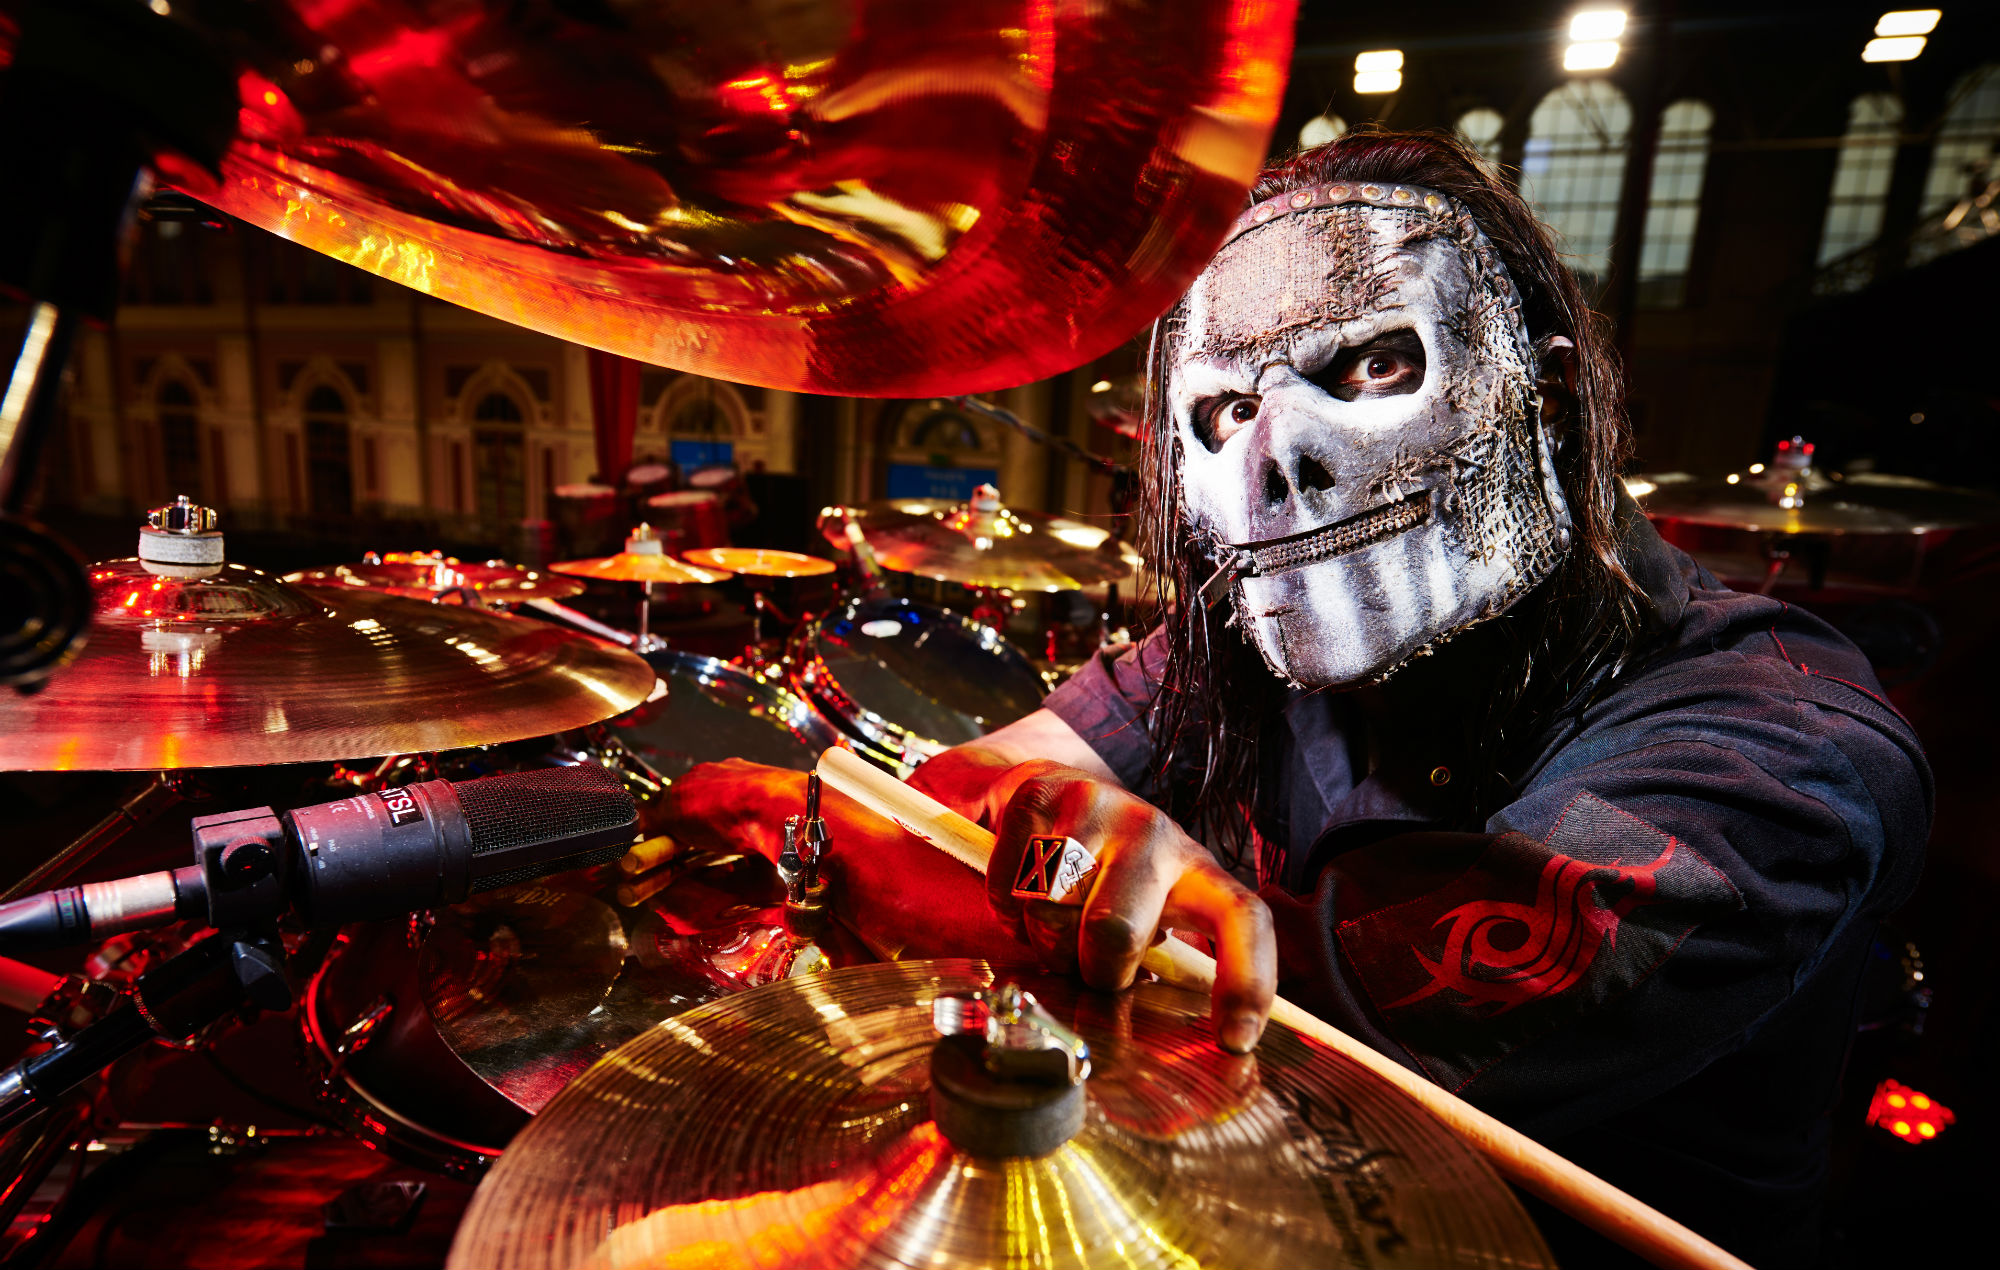 Slipknot drummer Jay Weinberg on how his dad flipped his shit when he discovered he was joining Slipknot